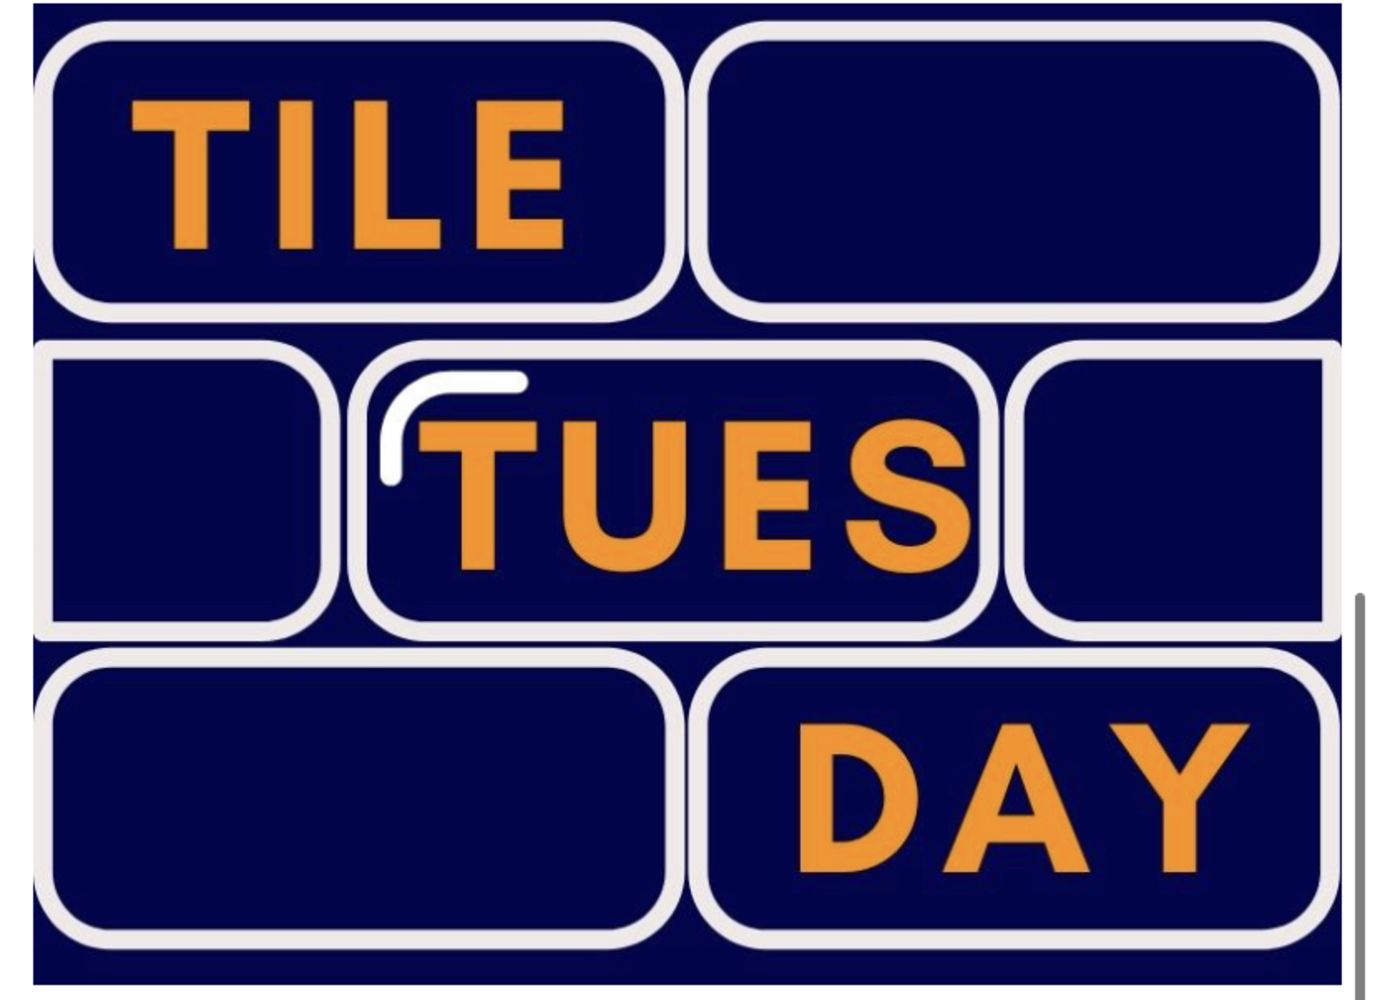 No Reserve - Tile Tuesday - “over £80k worth of tiles – Sourced from Johnsons Tiles” - 25th May 2021